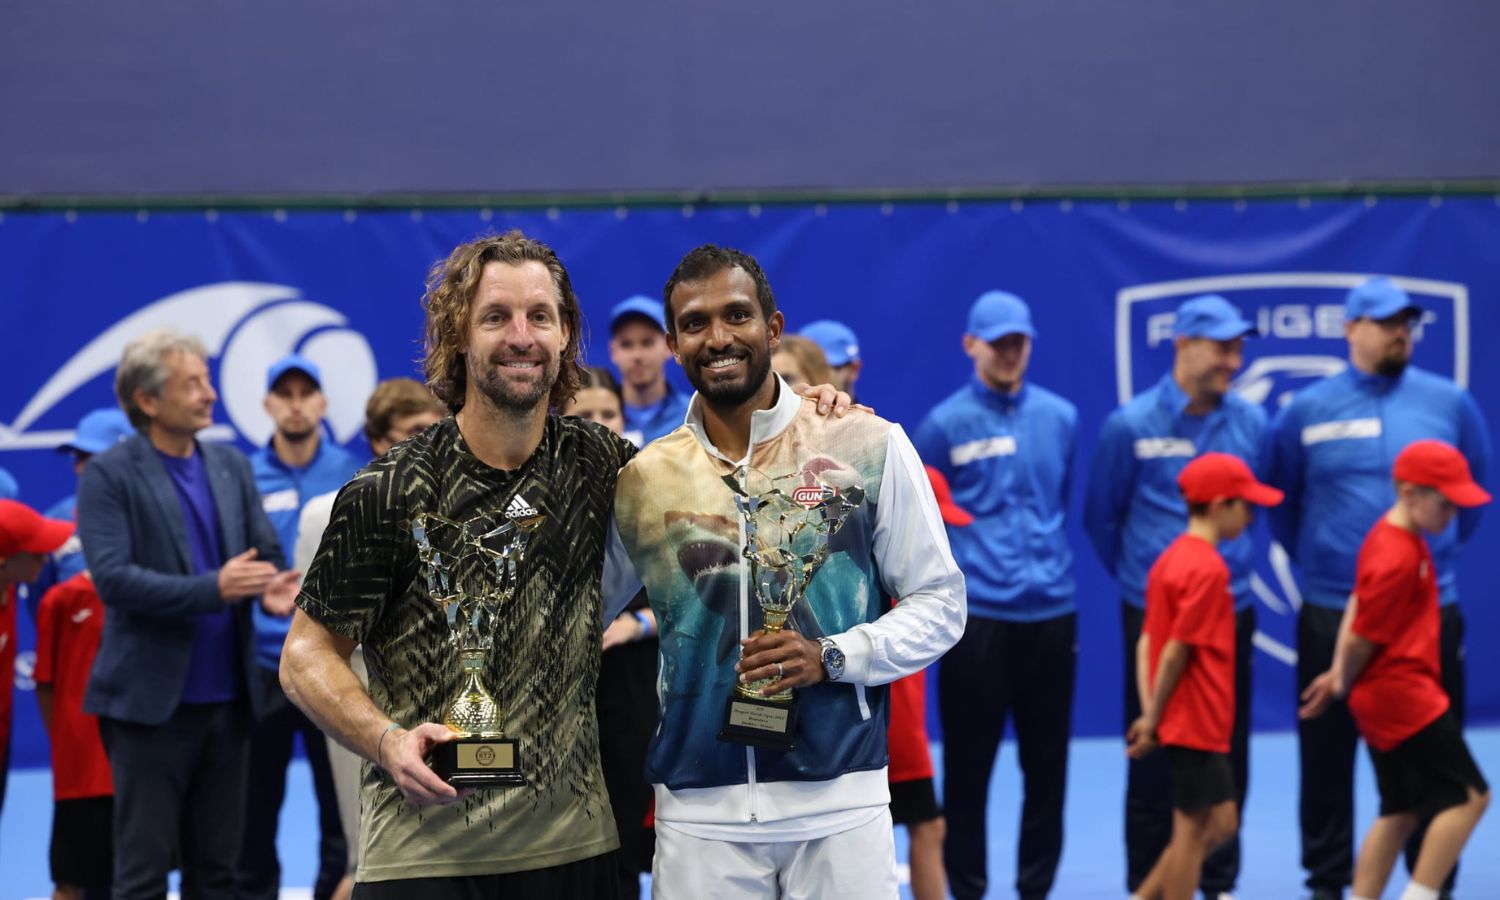 Balaji and Begemann secure Sardegna Open Doubles title in thrilling final